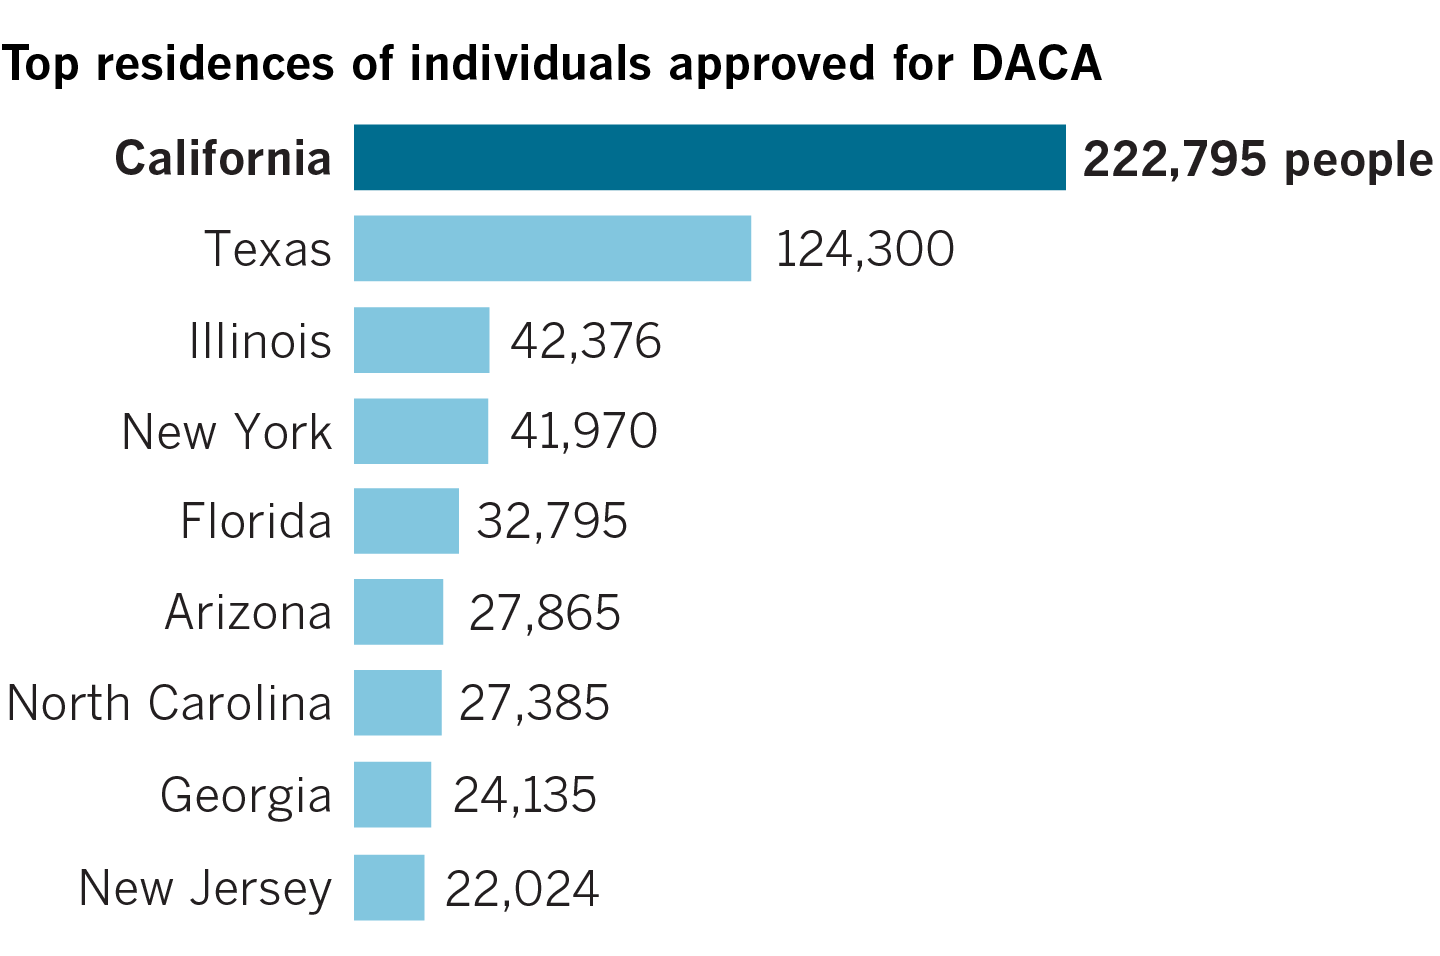 What’s next for DACA and the nearly 800,000 people protected by it